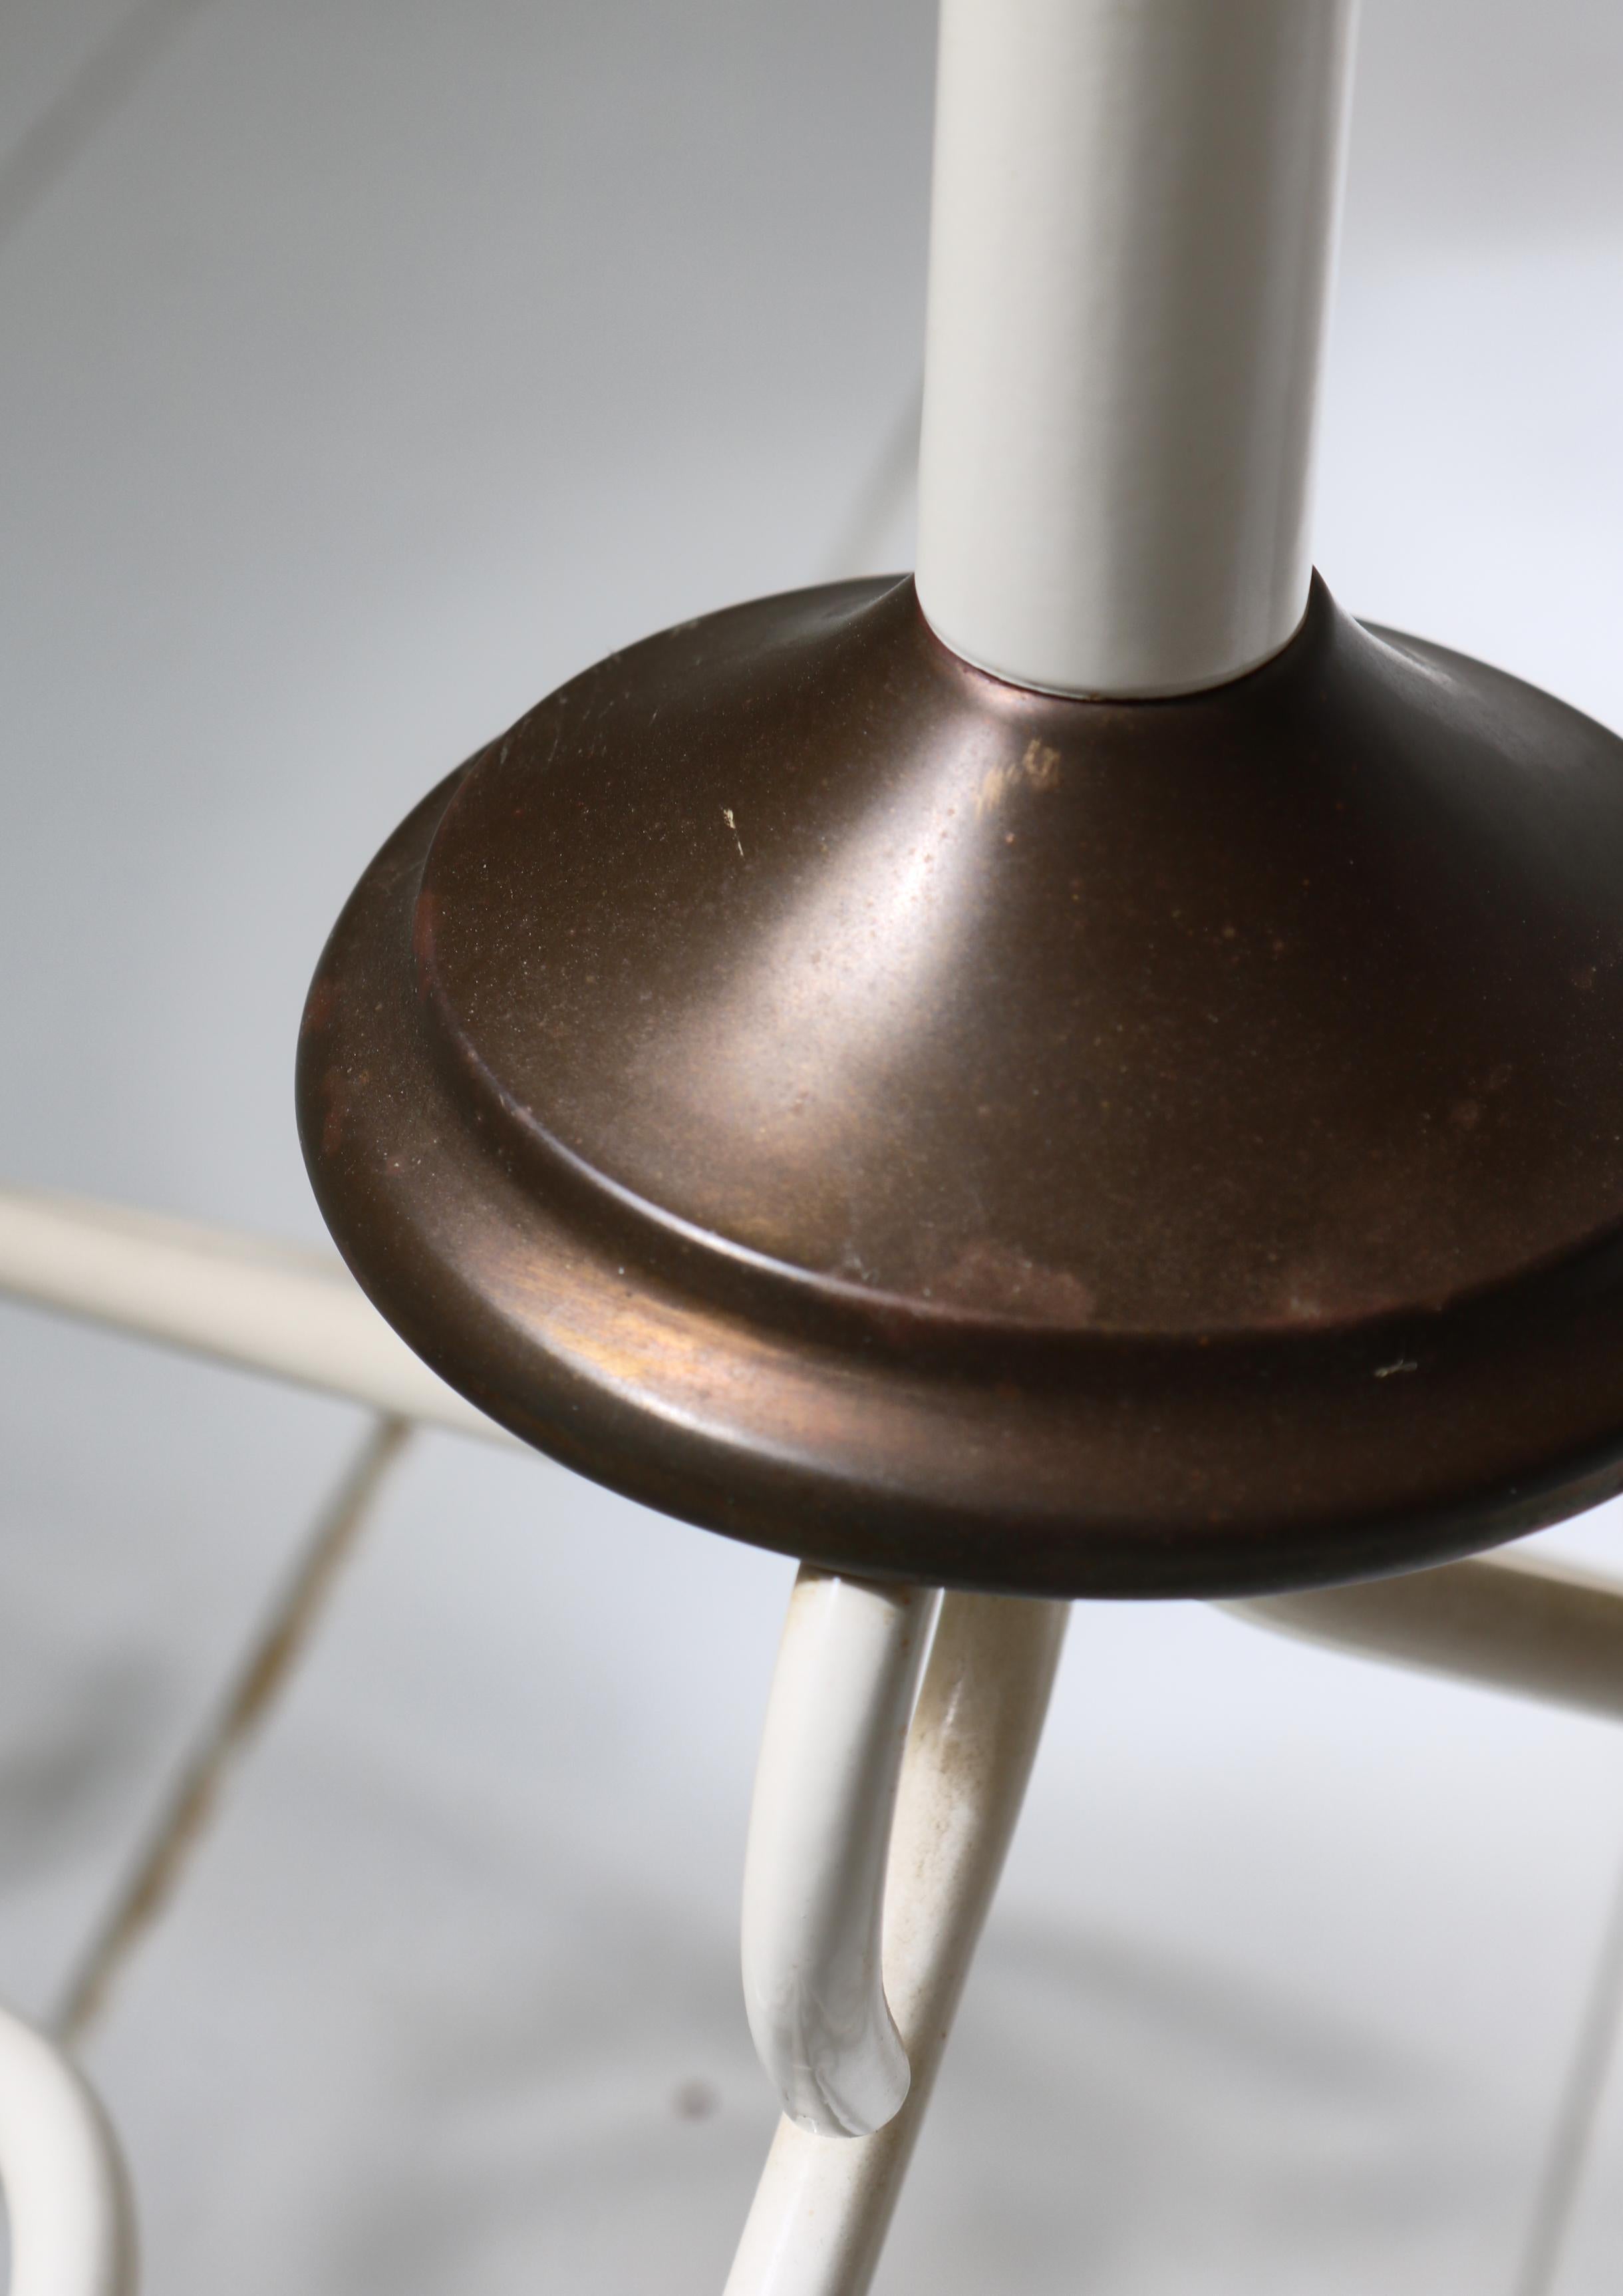 Scandinavian Art Deco Occasional Table in Patinated Brass & Iron, 1930s For Sale 6